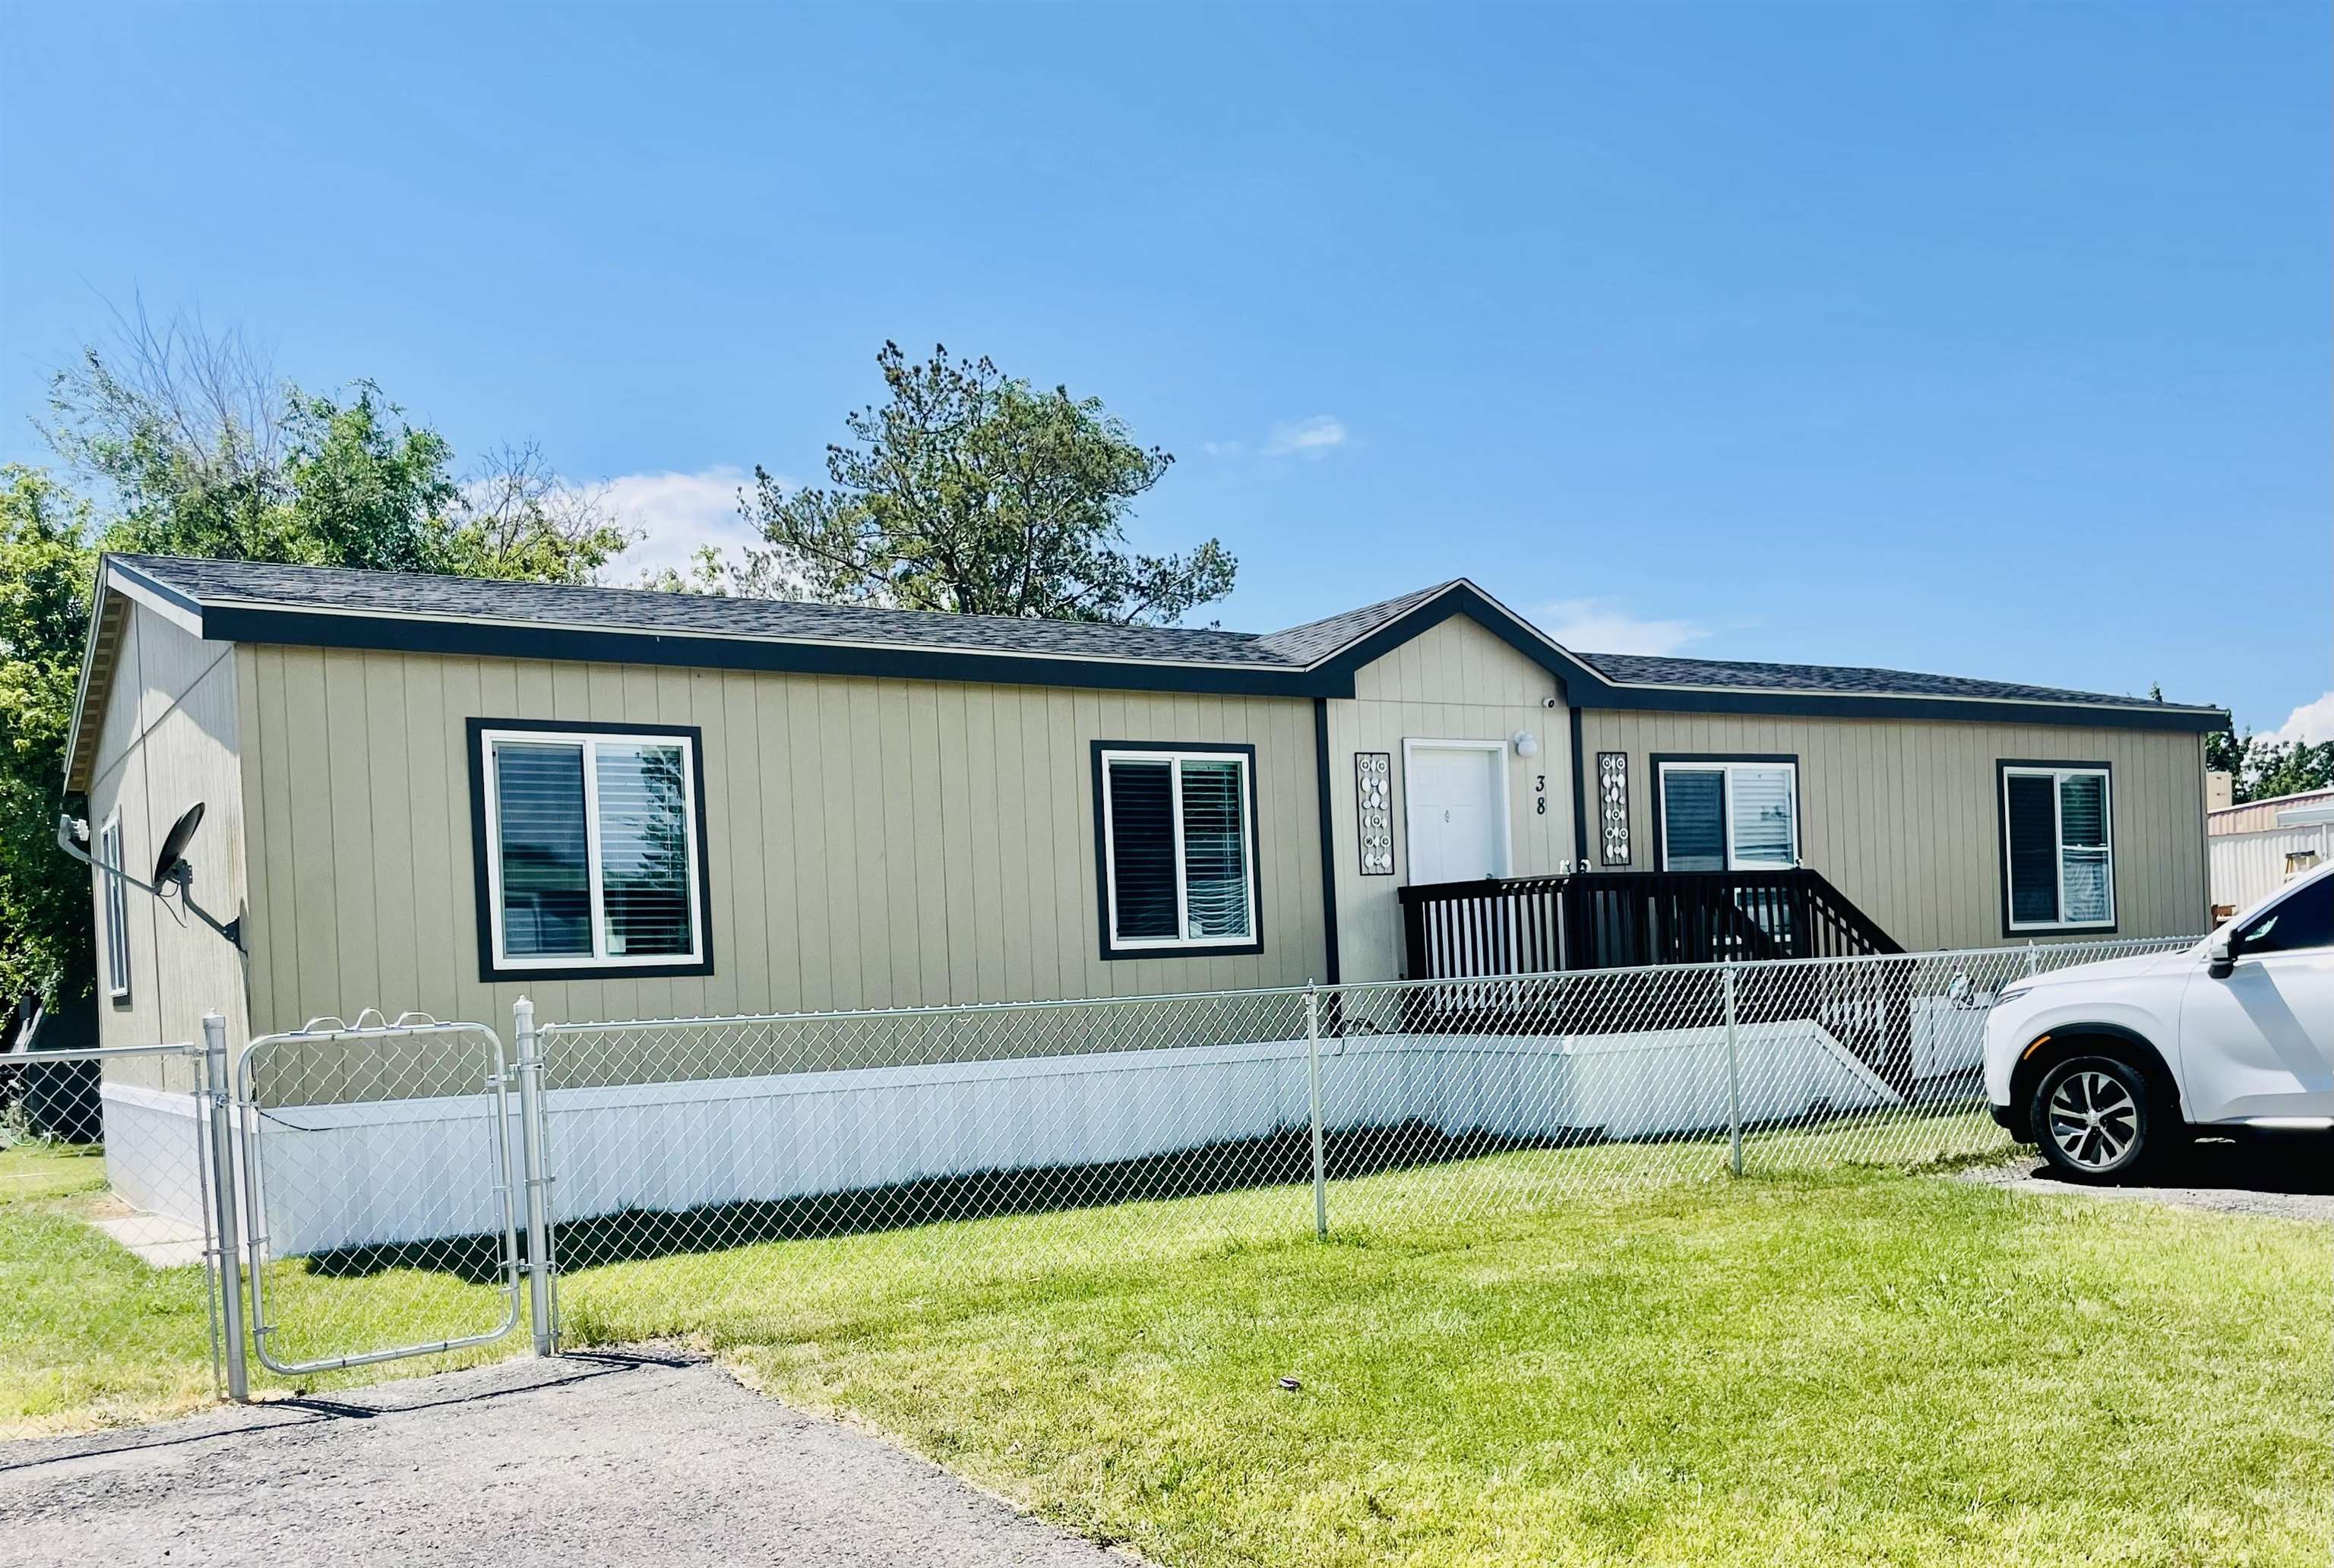 Looking for a spacious home that is close to schools, parks and shopping? Look no more! This beautiful four-bedroom and two-bathroom double-wide manufactured home featuring a split bedroom design plus an open concept with the feel of a new home will not last long! Call today for your private showing.   Buyer(s) to verify all information including measurements; subject to change/error.